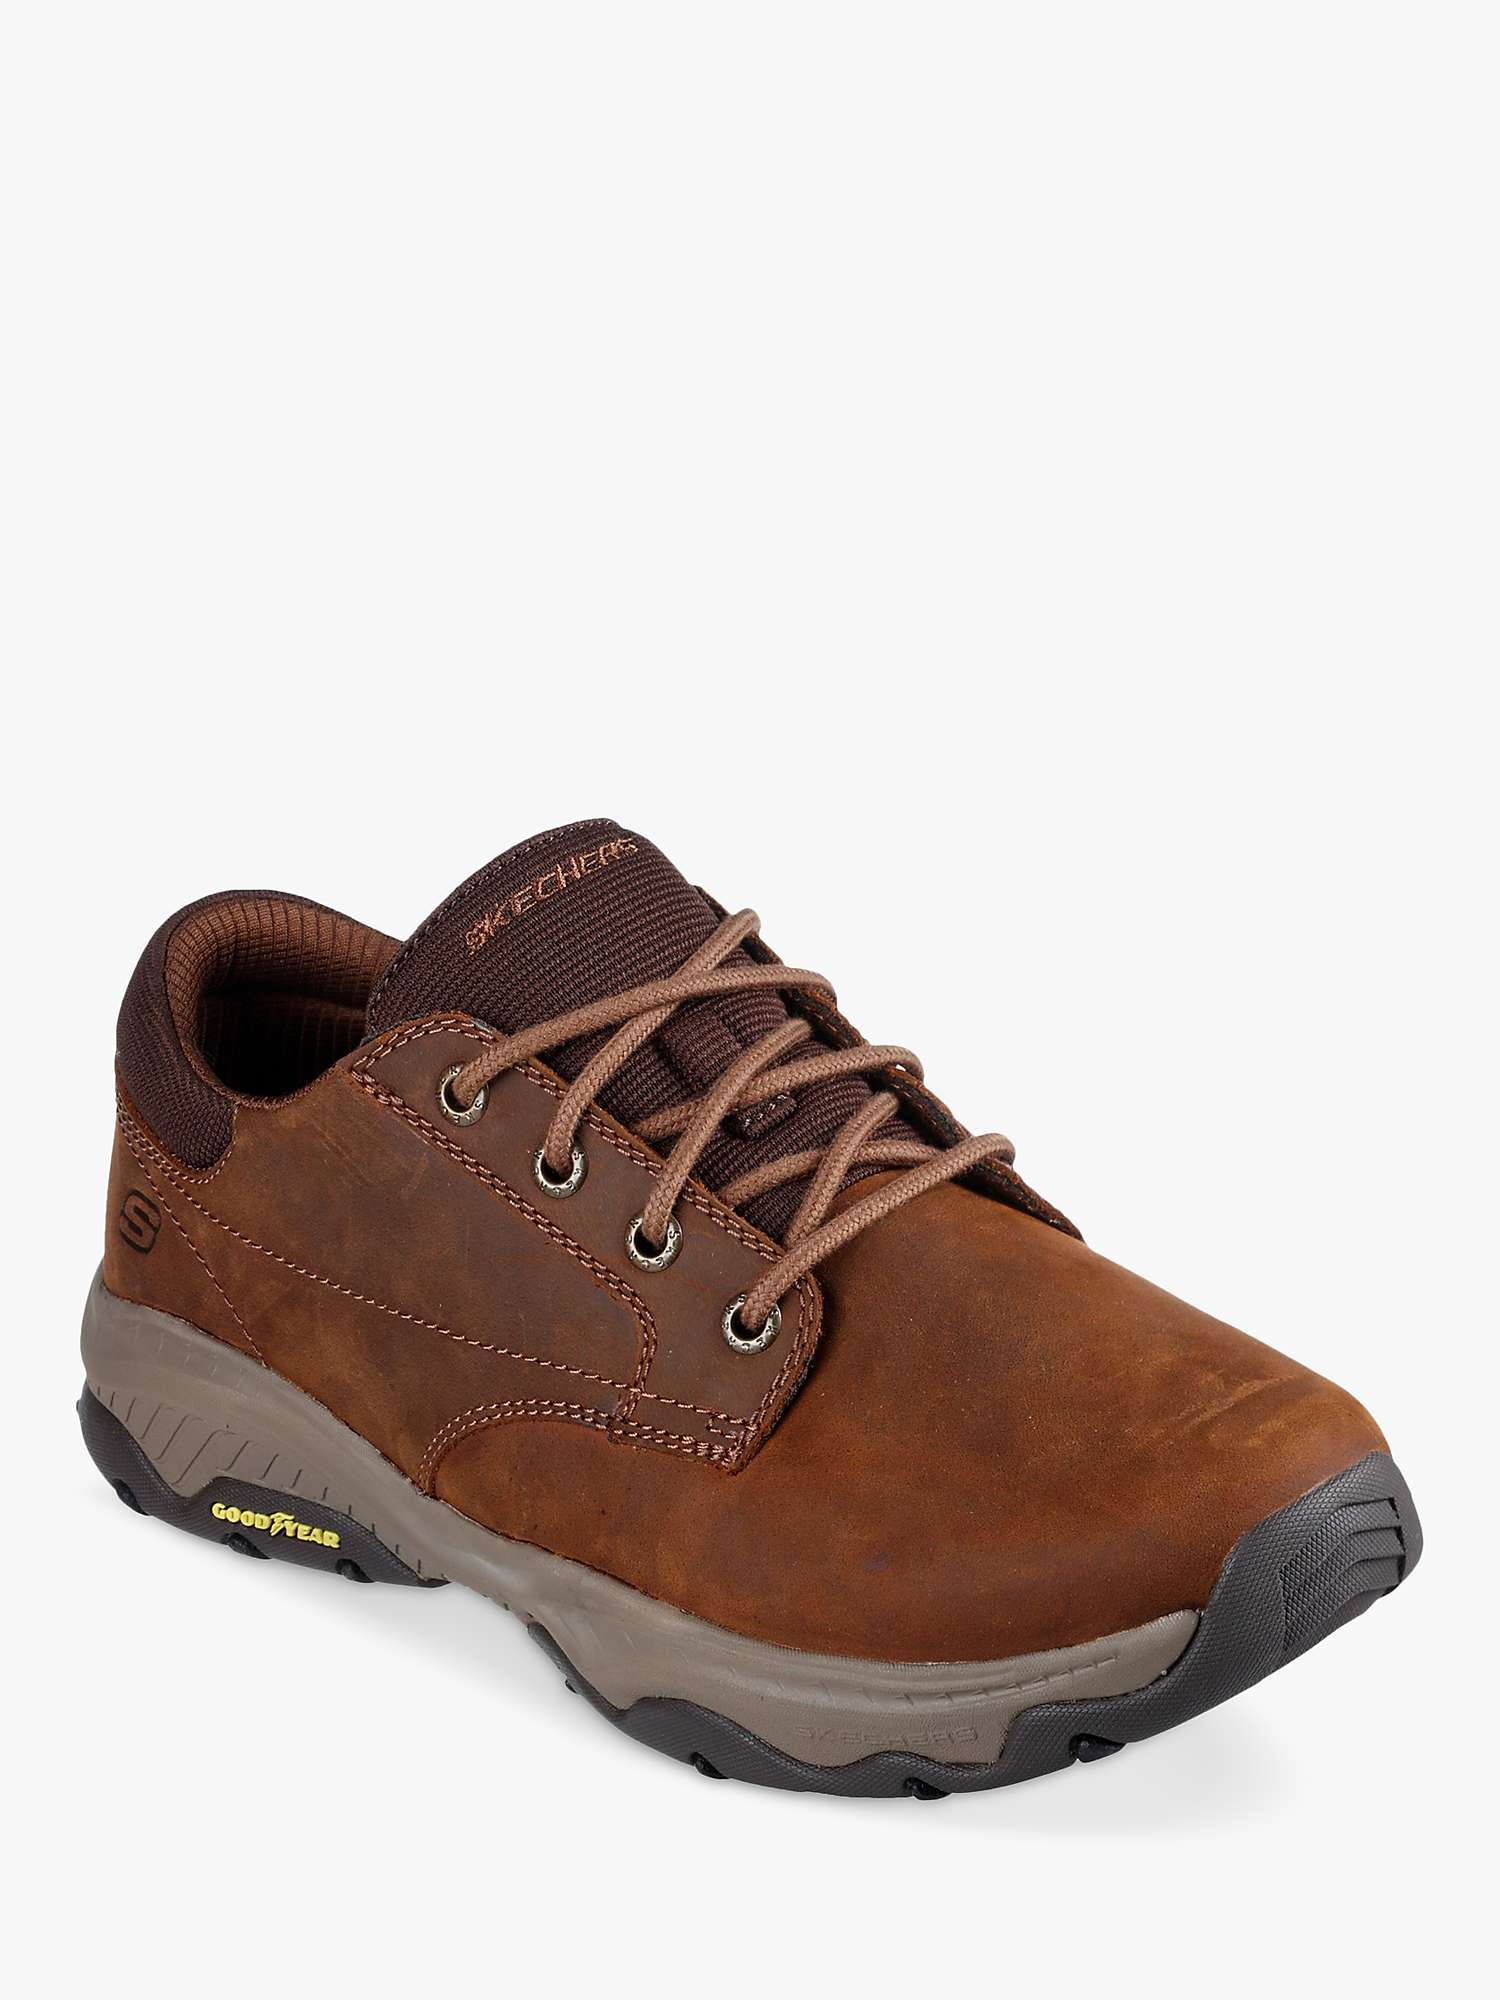 Buy Skechers Relaxed Fit Craster Fenzo Shoes, Dark Brown Online at johnlewis.com